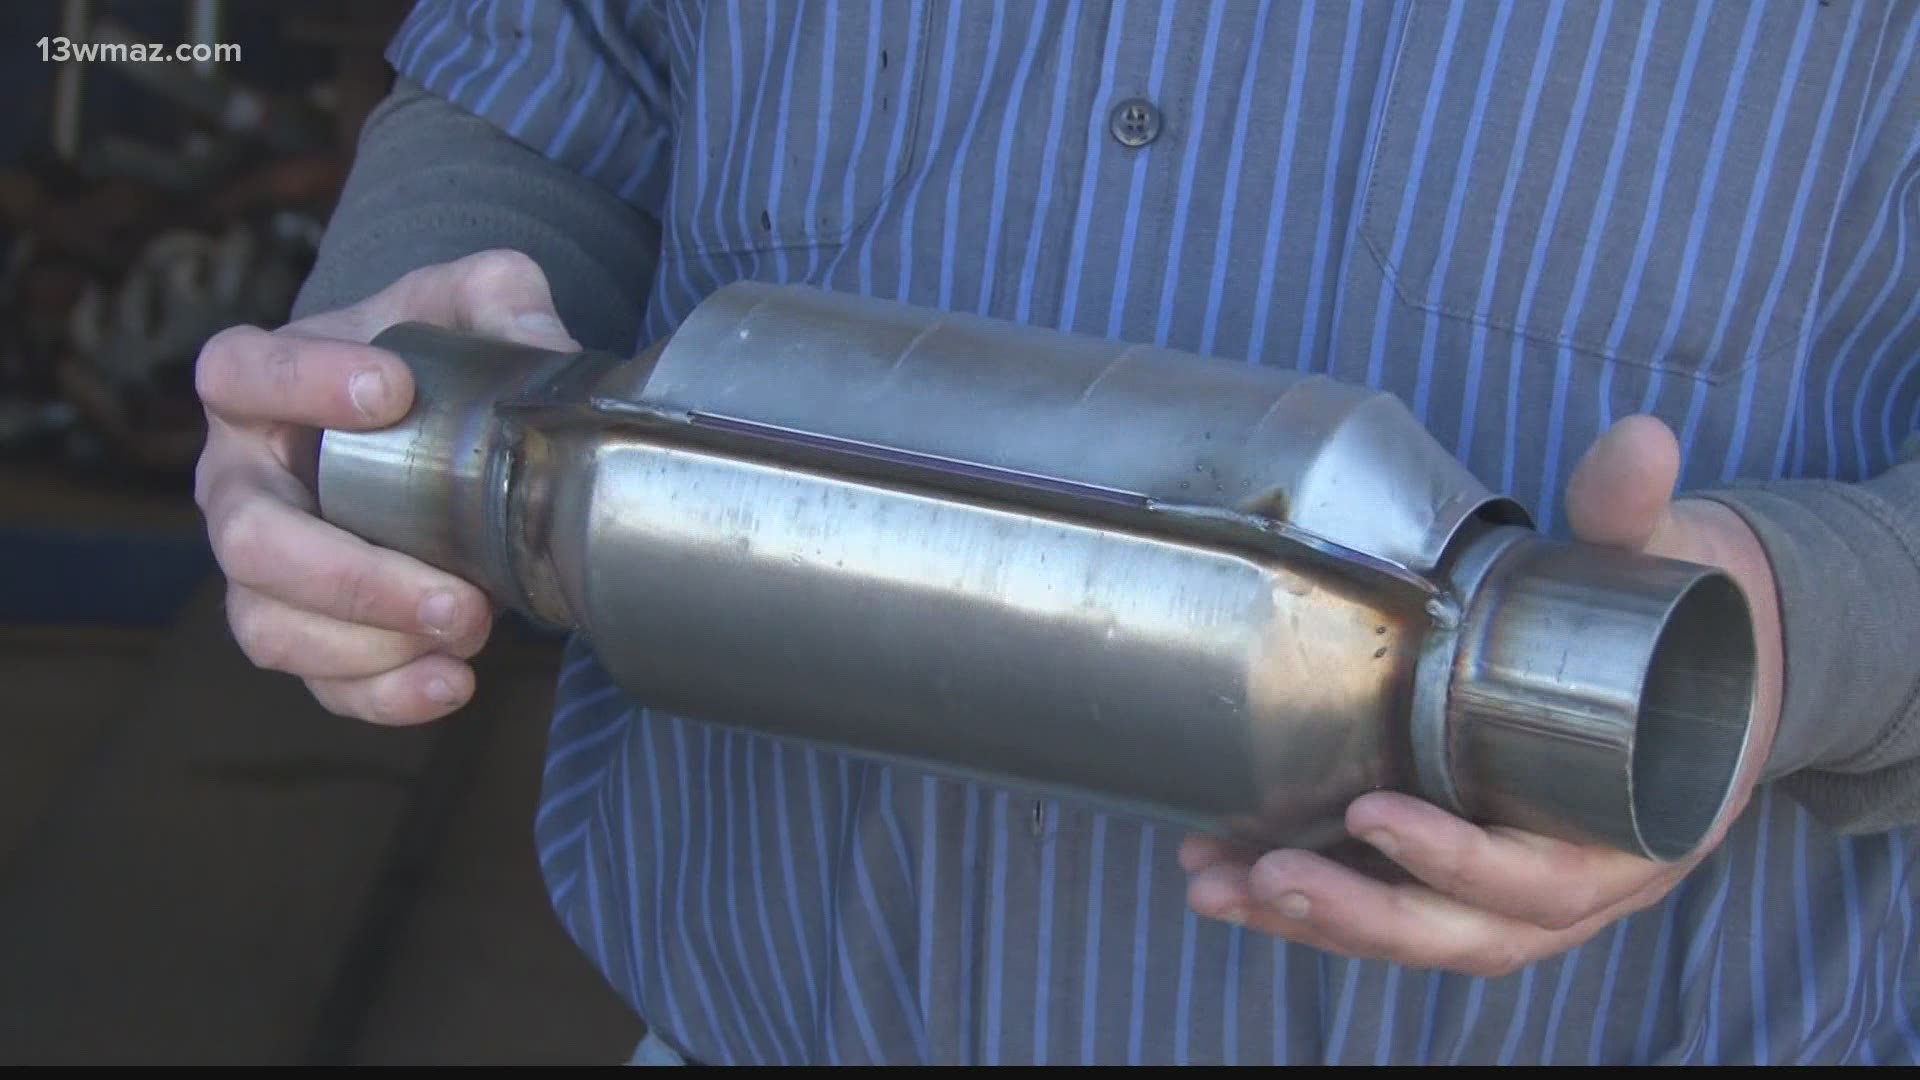 In the past two months, nearly as many catalytic converters have been stolen as in all of 2020, police say.